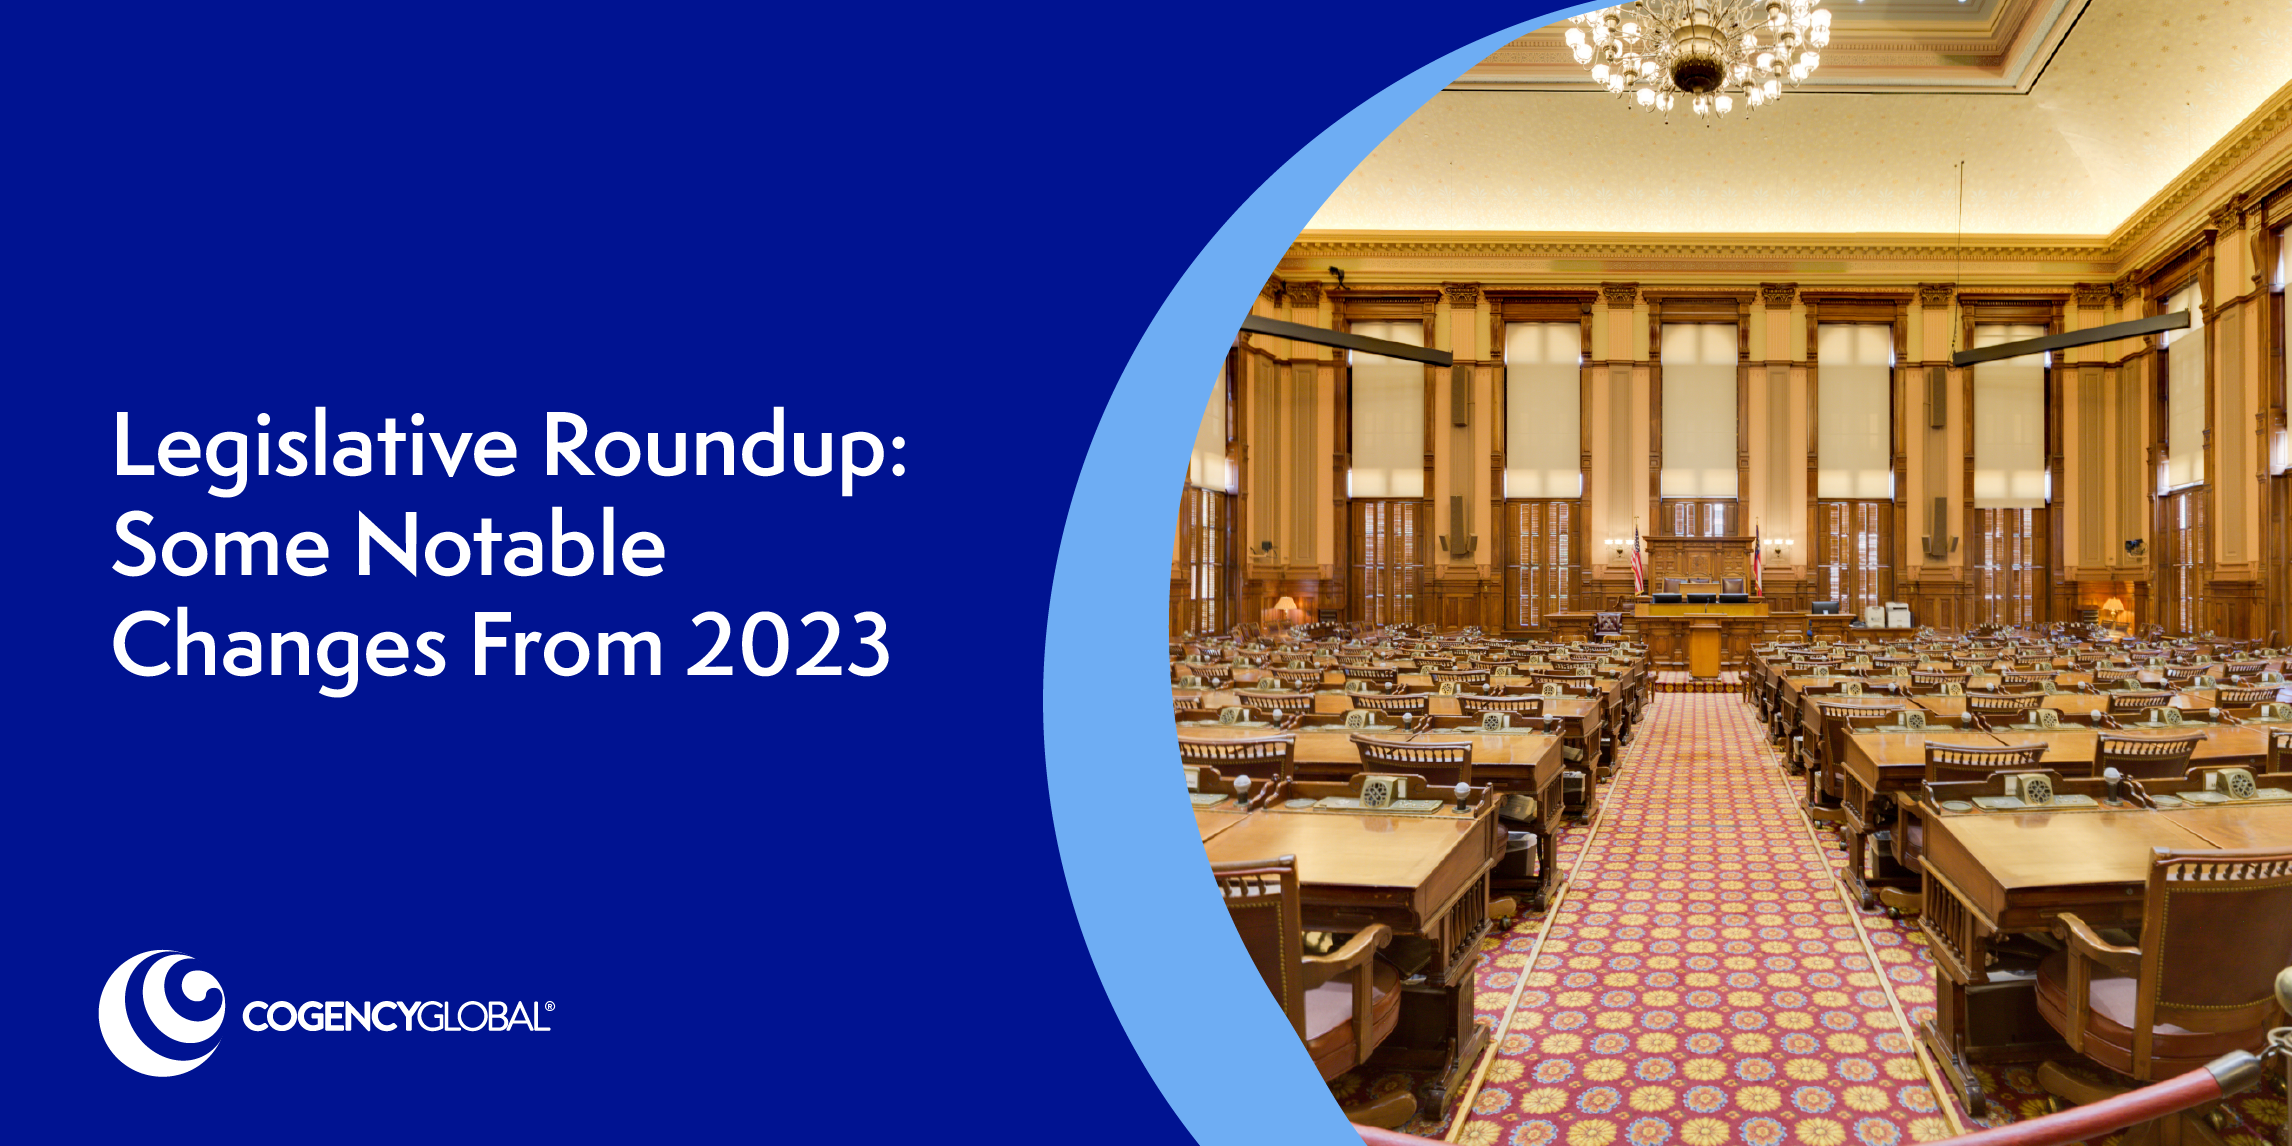 Legislative Roundup: Some Notable Changes From 2023